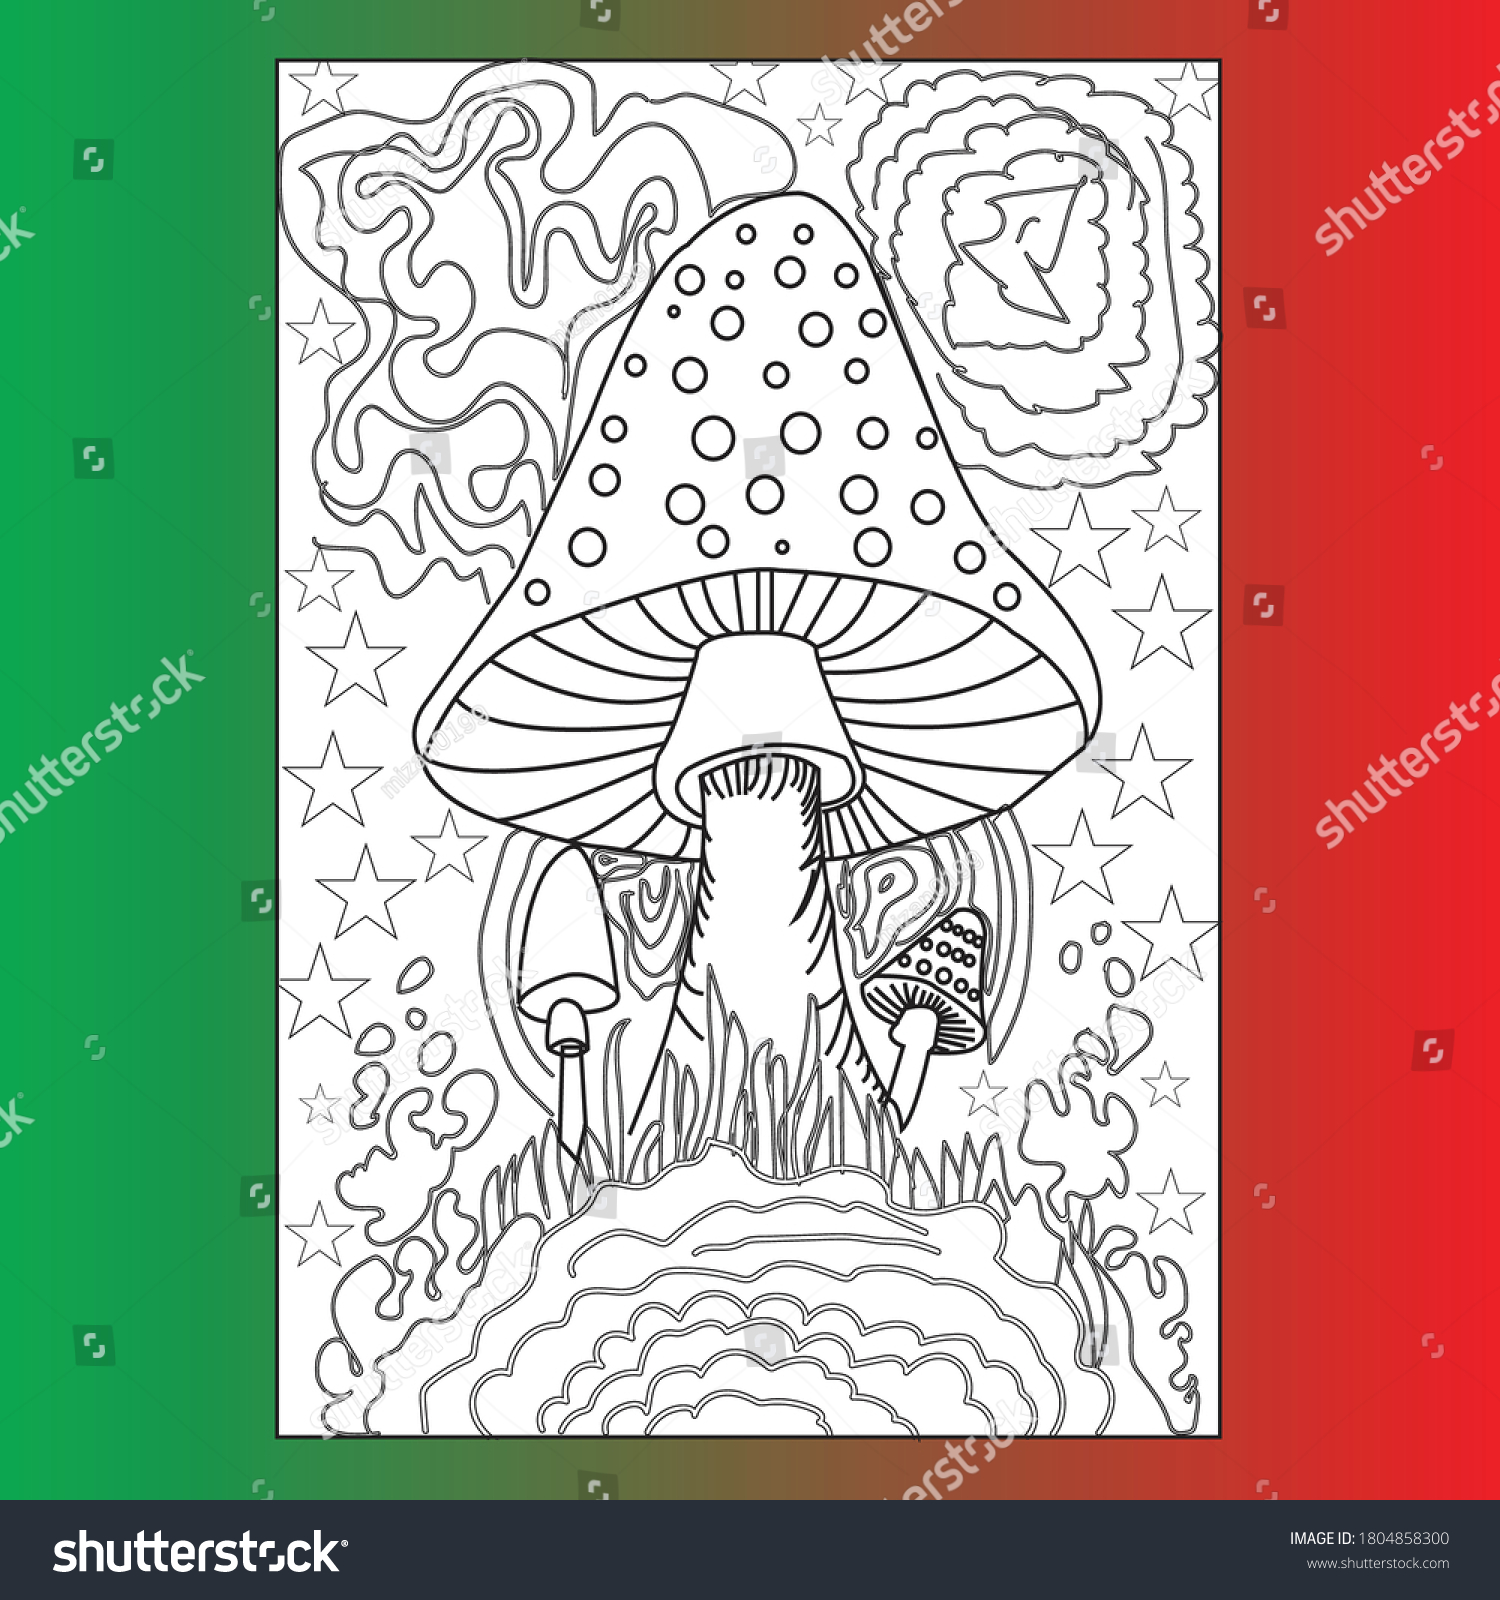 Stoner Coloring Book Pages You Stock Vector Royalty Free 20